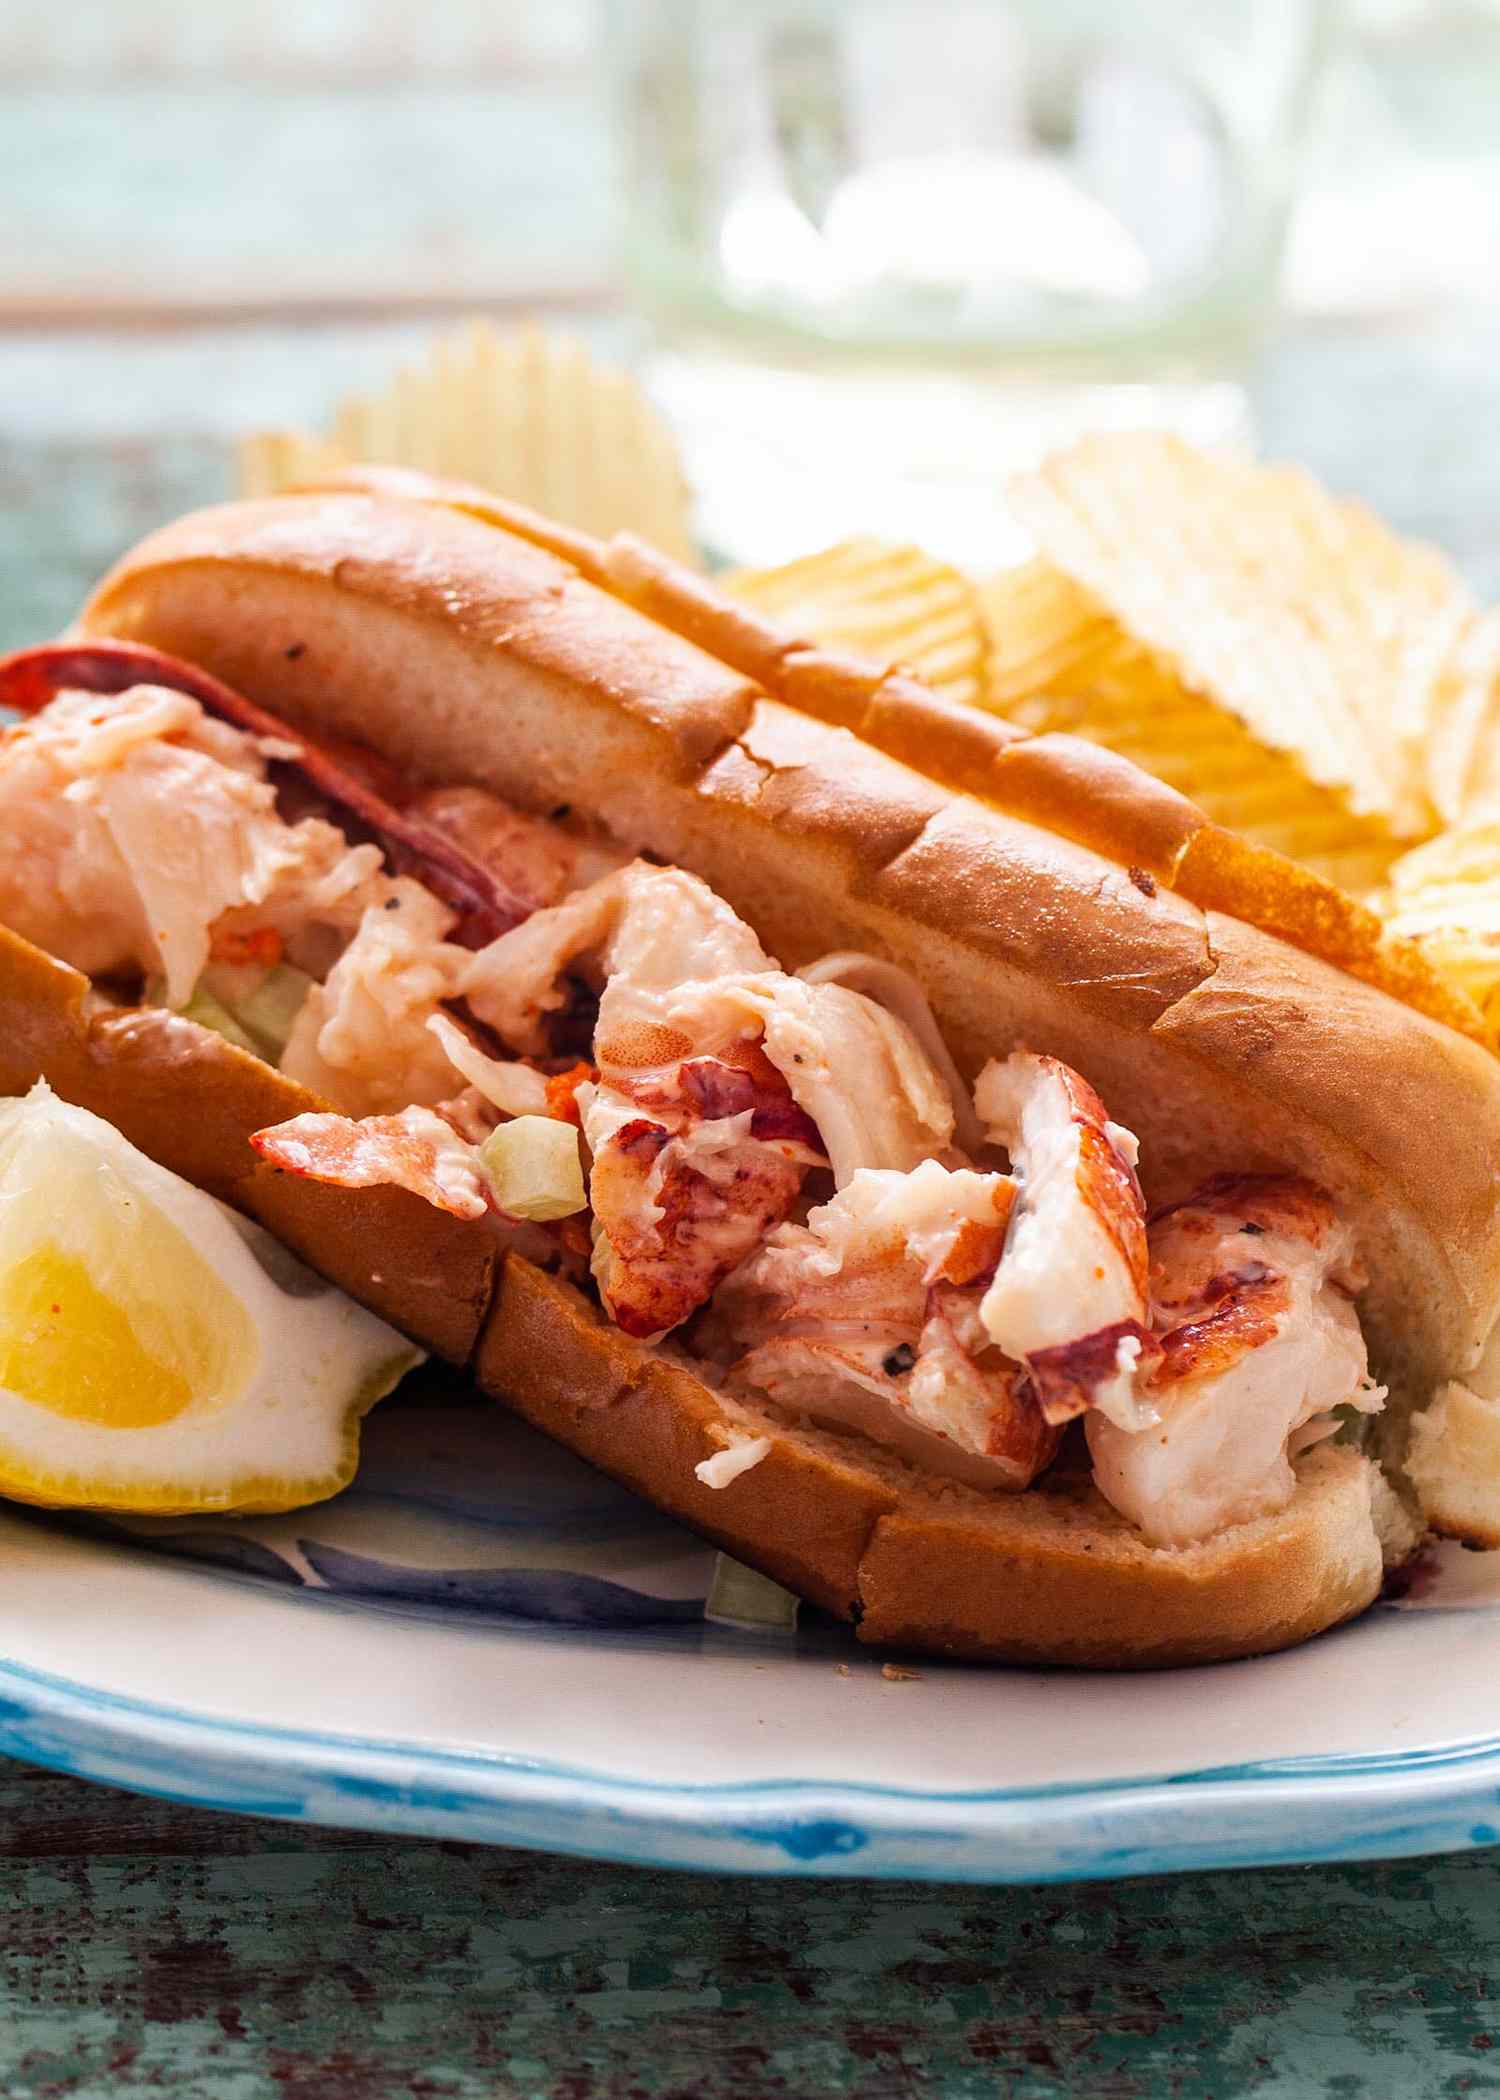 lucy cafes key west lobster rolls